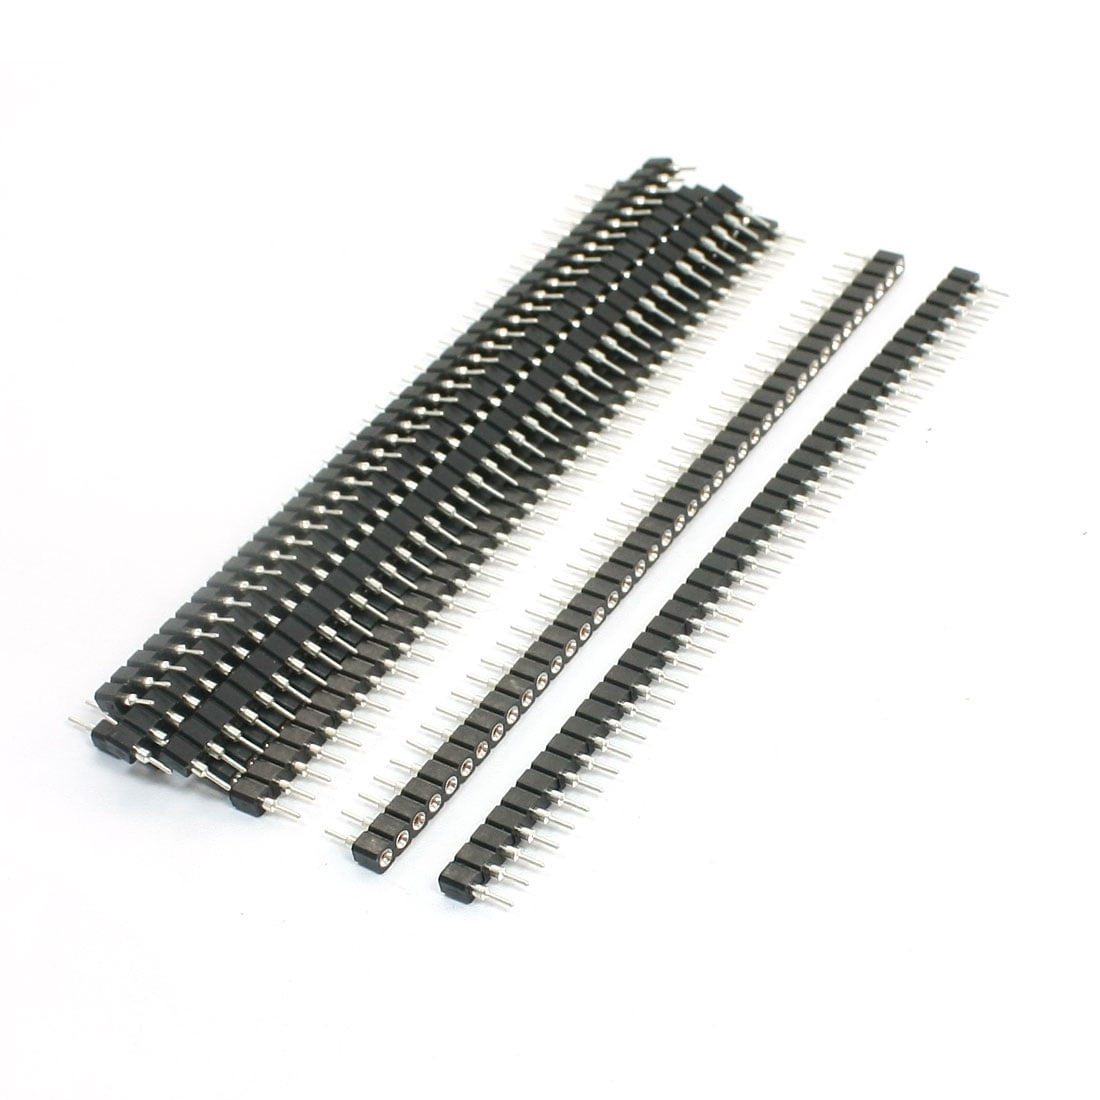 Uxcell 5 Pcs 2x40 80 Pin 2.54 mm Double Row Straight Male PBC Pin Header Strip 